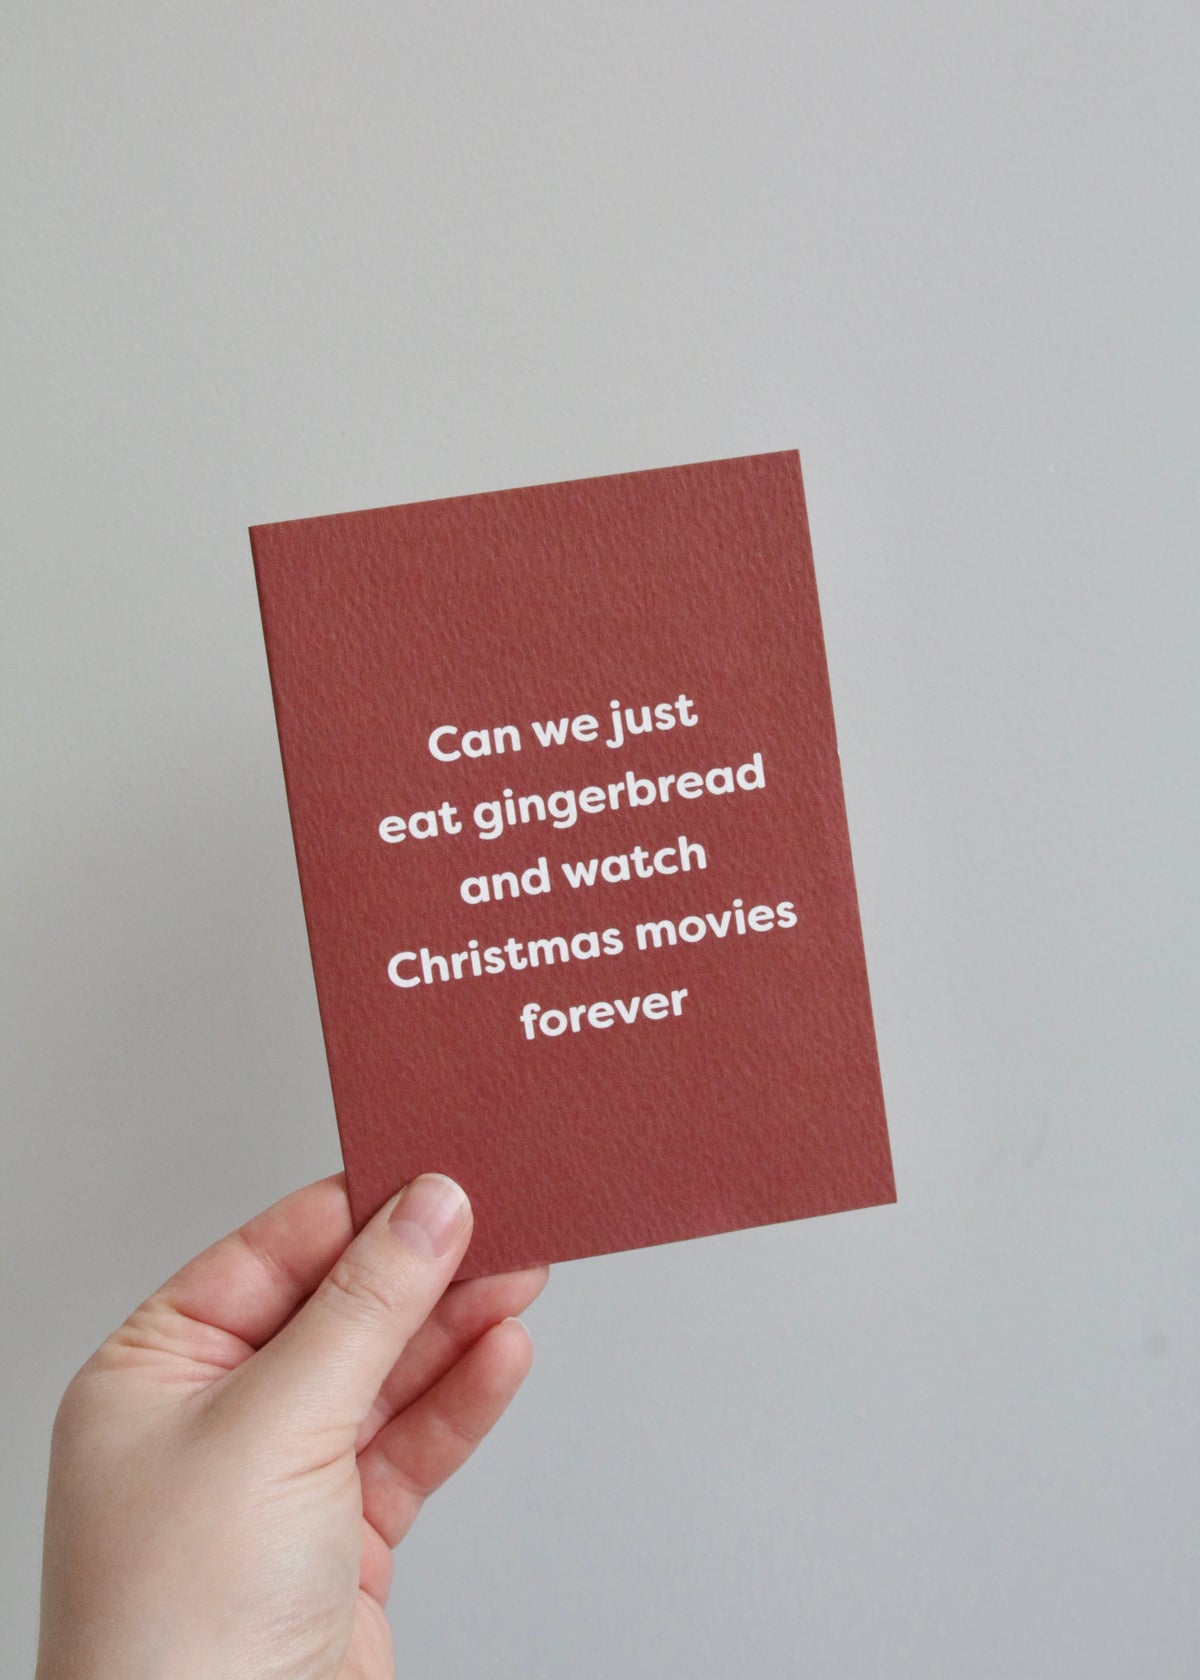 Eat Gingerbread and Watch Christmas Movies Forever Card Holding